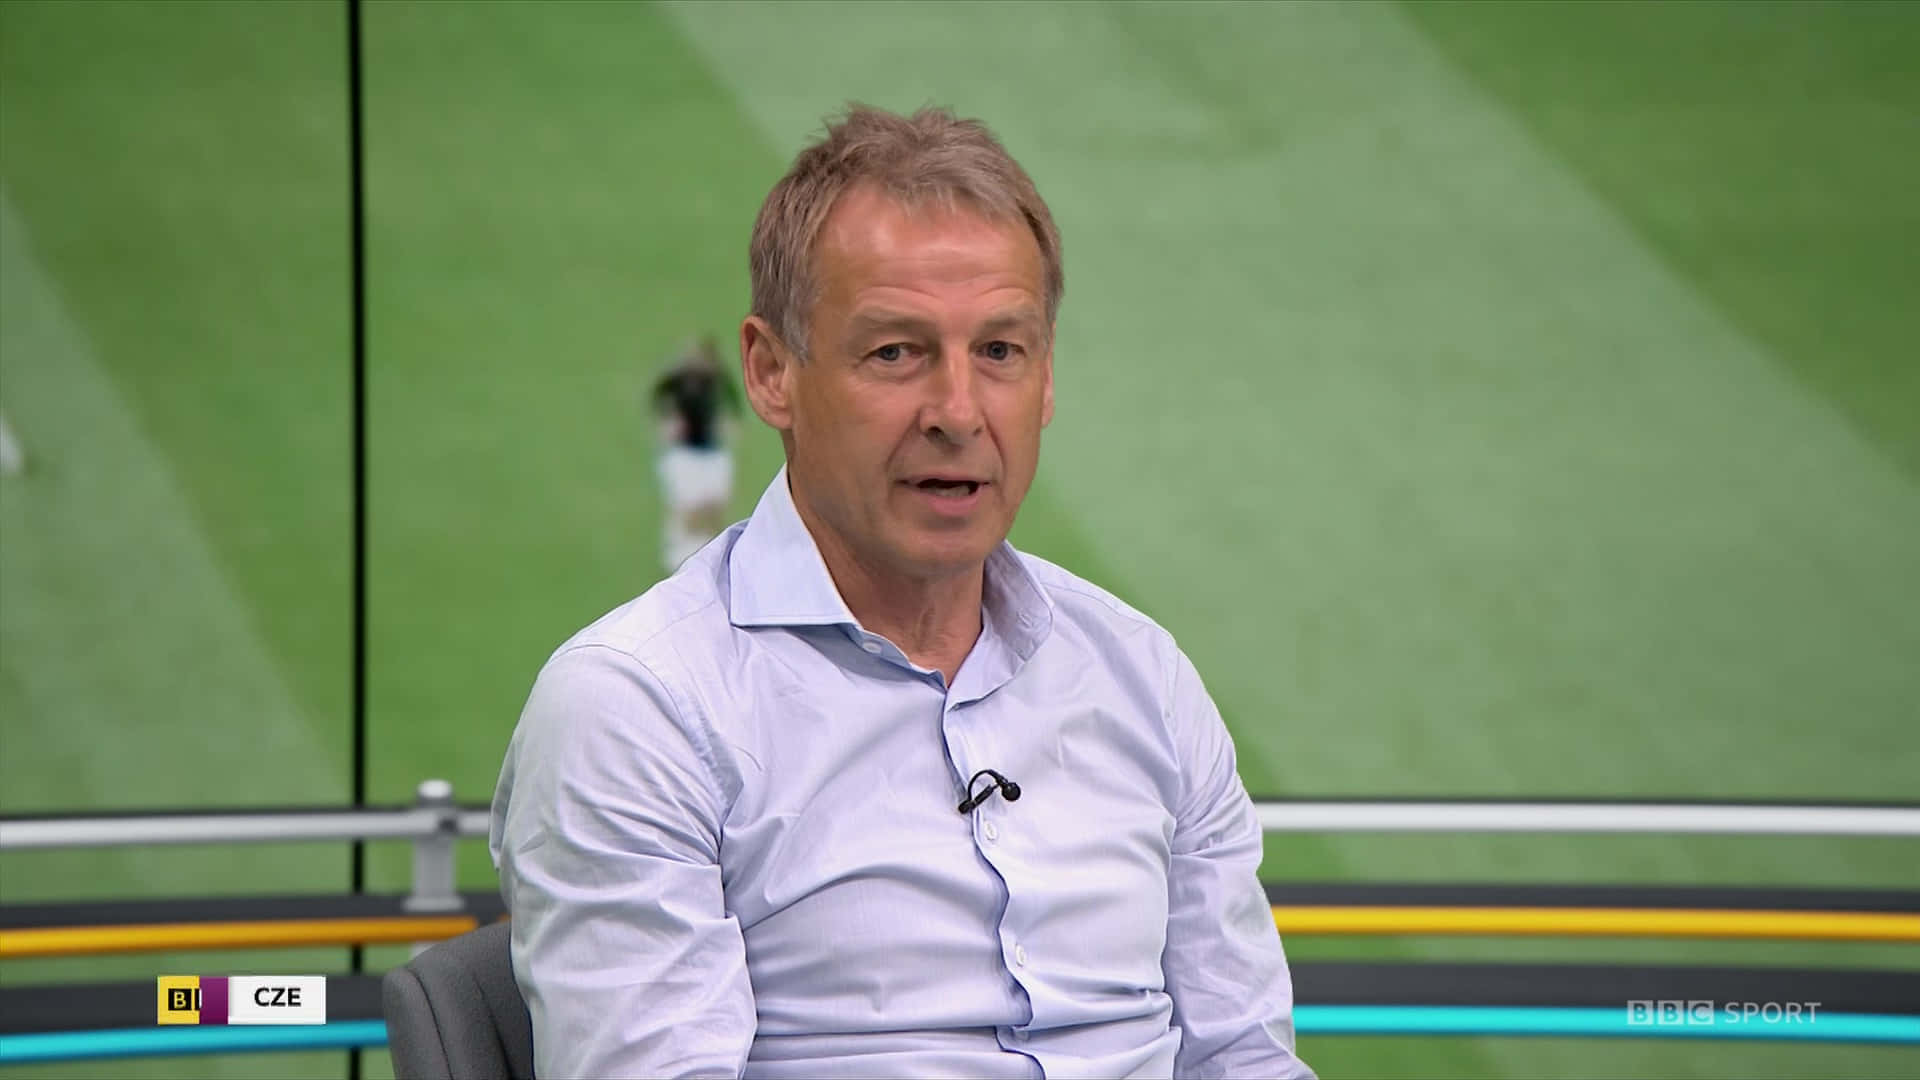 Jurgenklinsmann Bbc Sport Is Not A Complete Sentence And Does Not Provide Enough Context For A Proper Translation. Could You Please Provide A Full Sentence Or Phrase That You Would Like Translated? Wallpaper